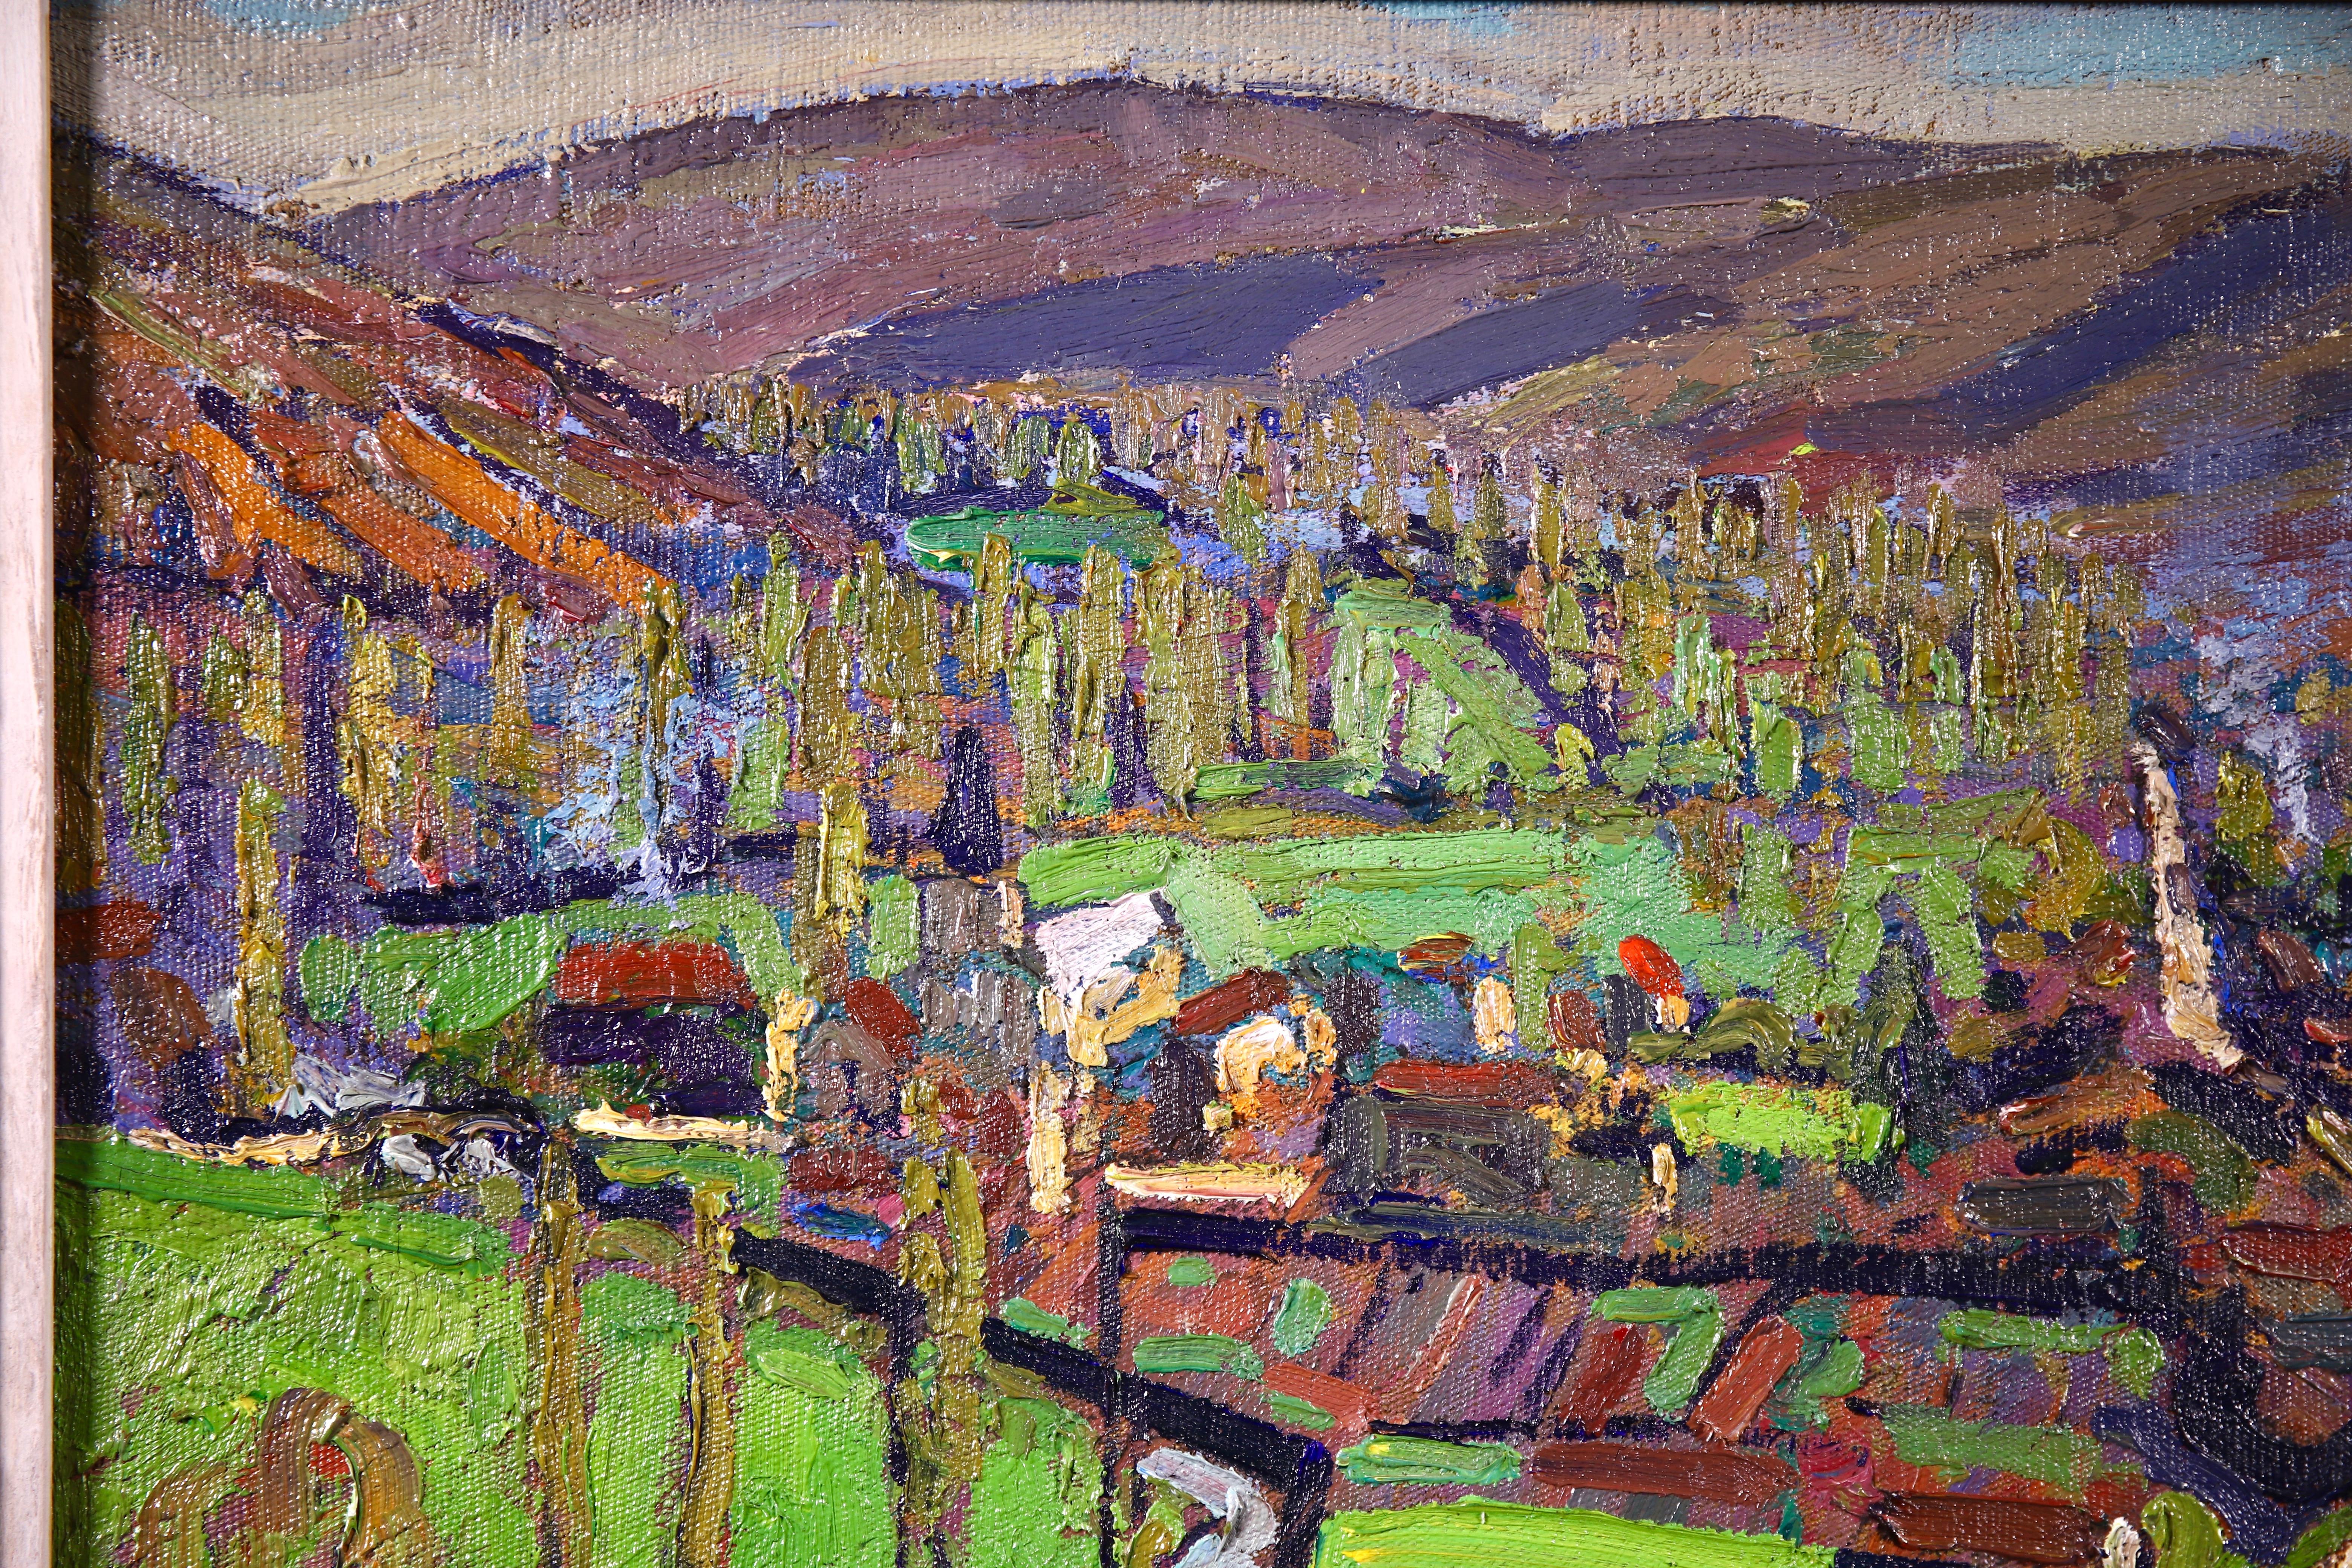 Labastide-du-Vert - 20th Century Oil, Landscape of Provence, France by Ferrieres - Post-Impressionist Painting by Jacques Martin-Ferrières